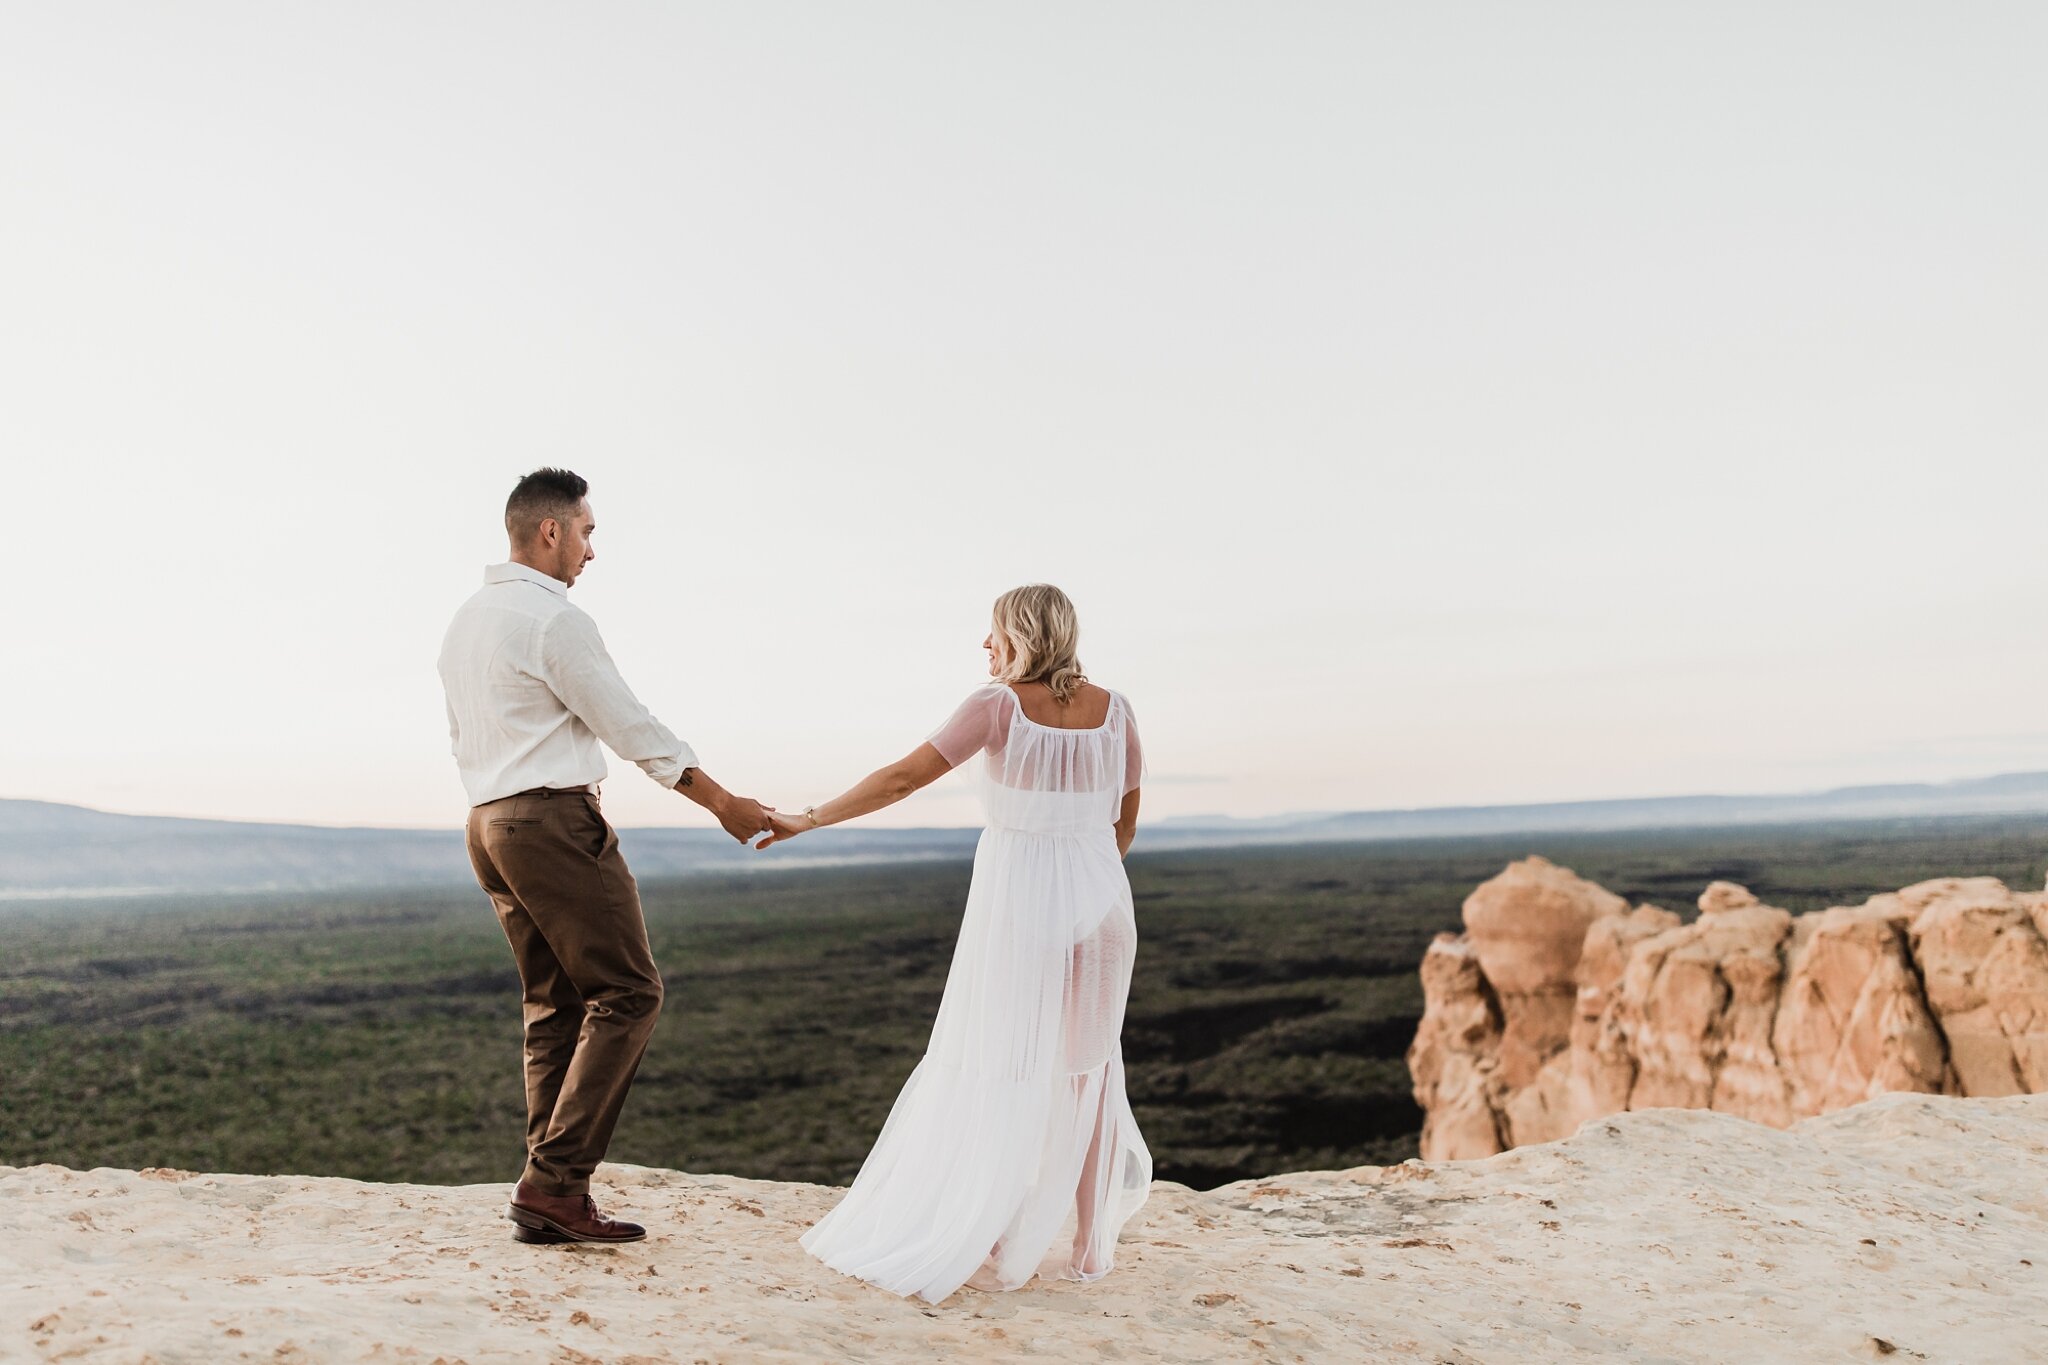 Alicia+lucia+photography+-+albuquerque+wedding+photographer+-+santa+fe+wedding+photography+-+new+mexico+wedding+photographer+-+new+mexico+wedding+-+anniversary+-+styled+anniversary+-+elopement+-+styled+elopement_0058.jpg